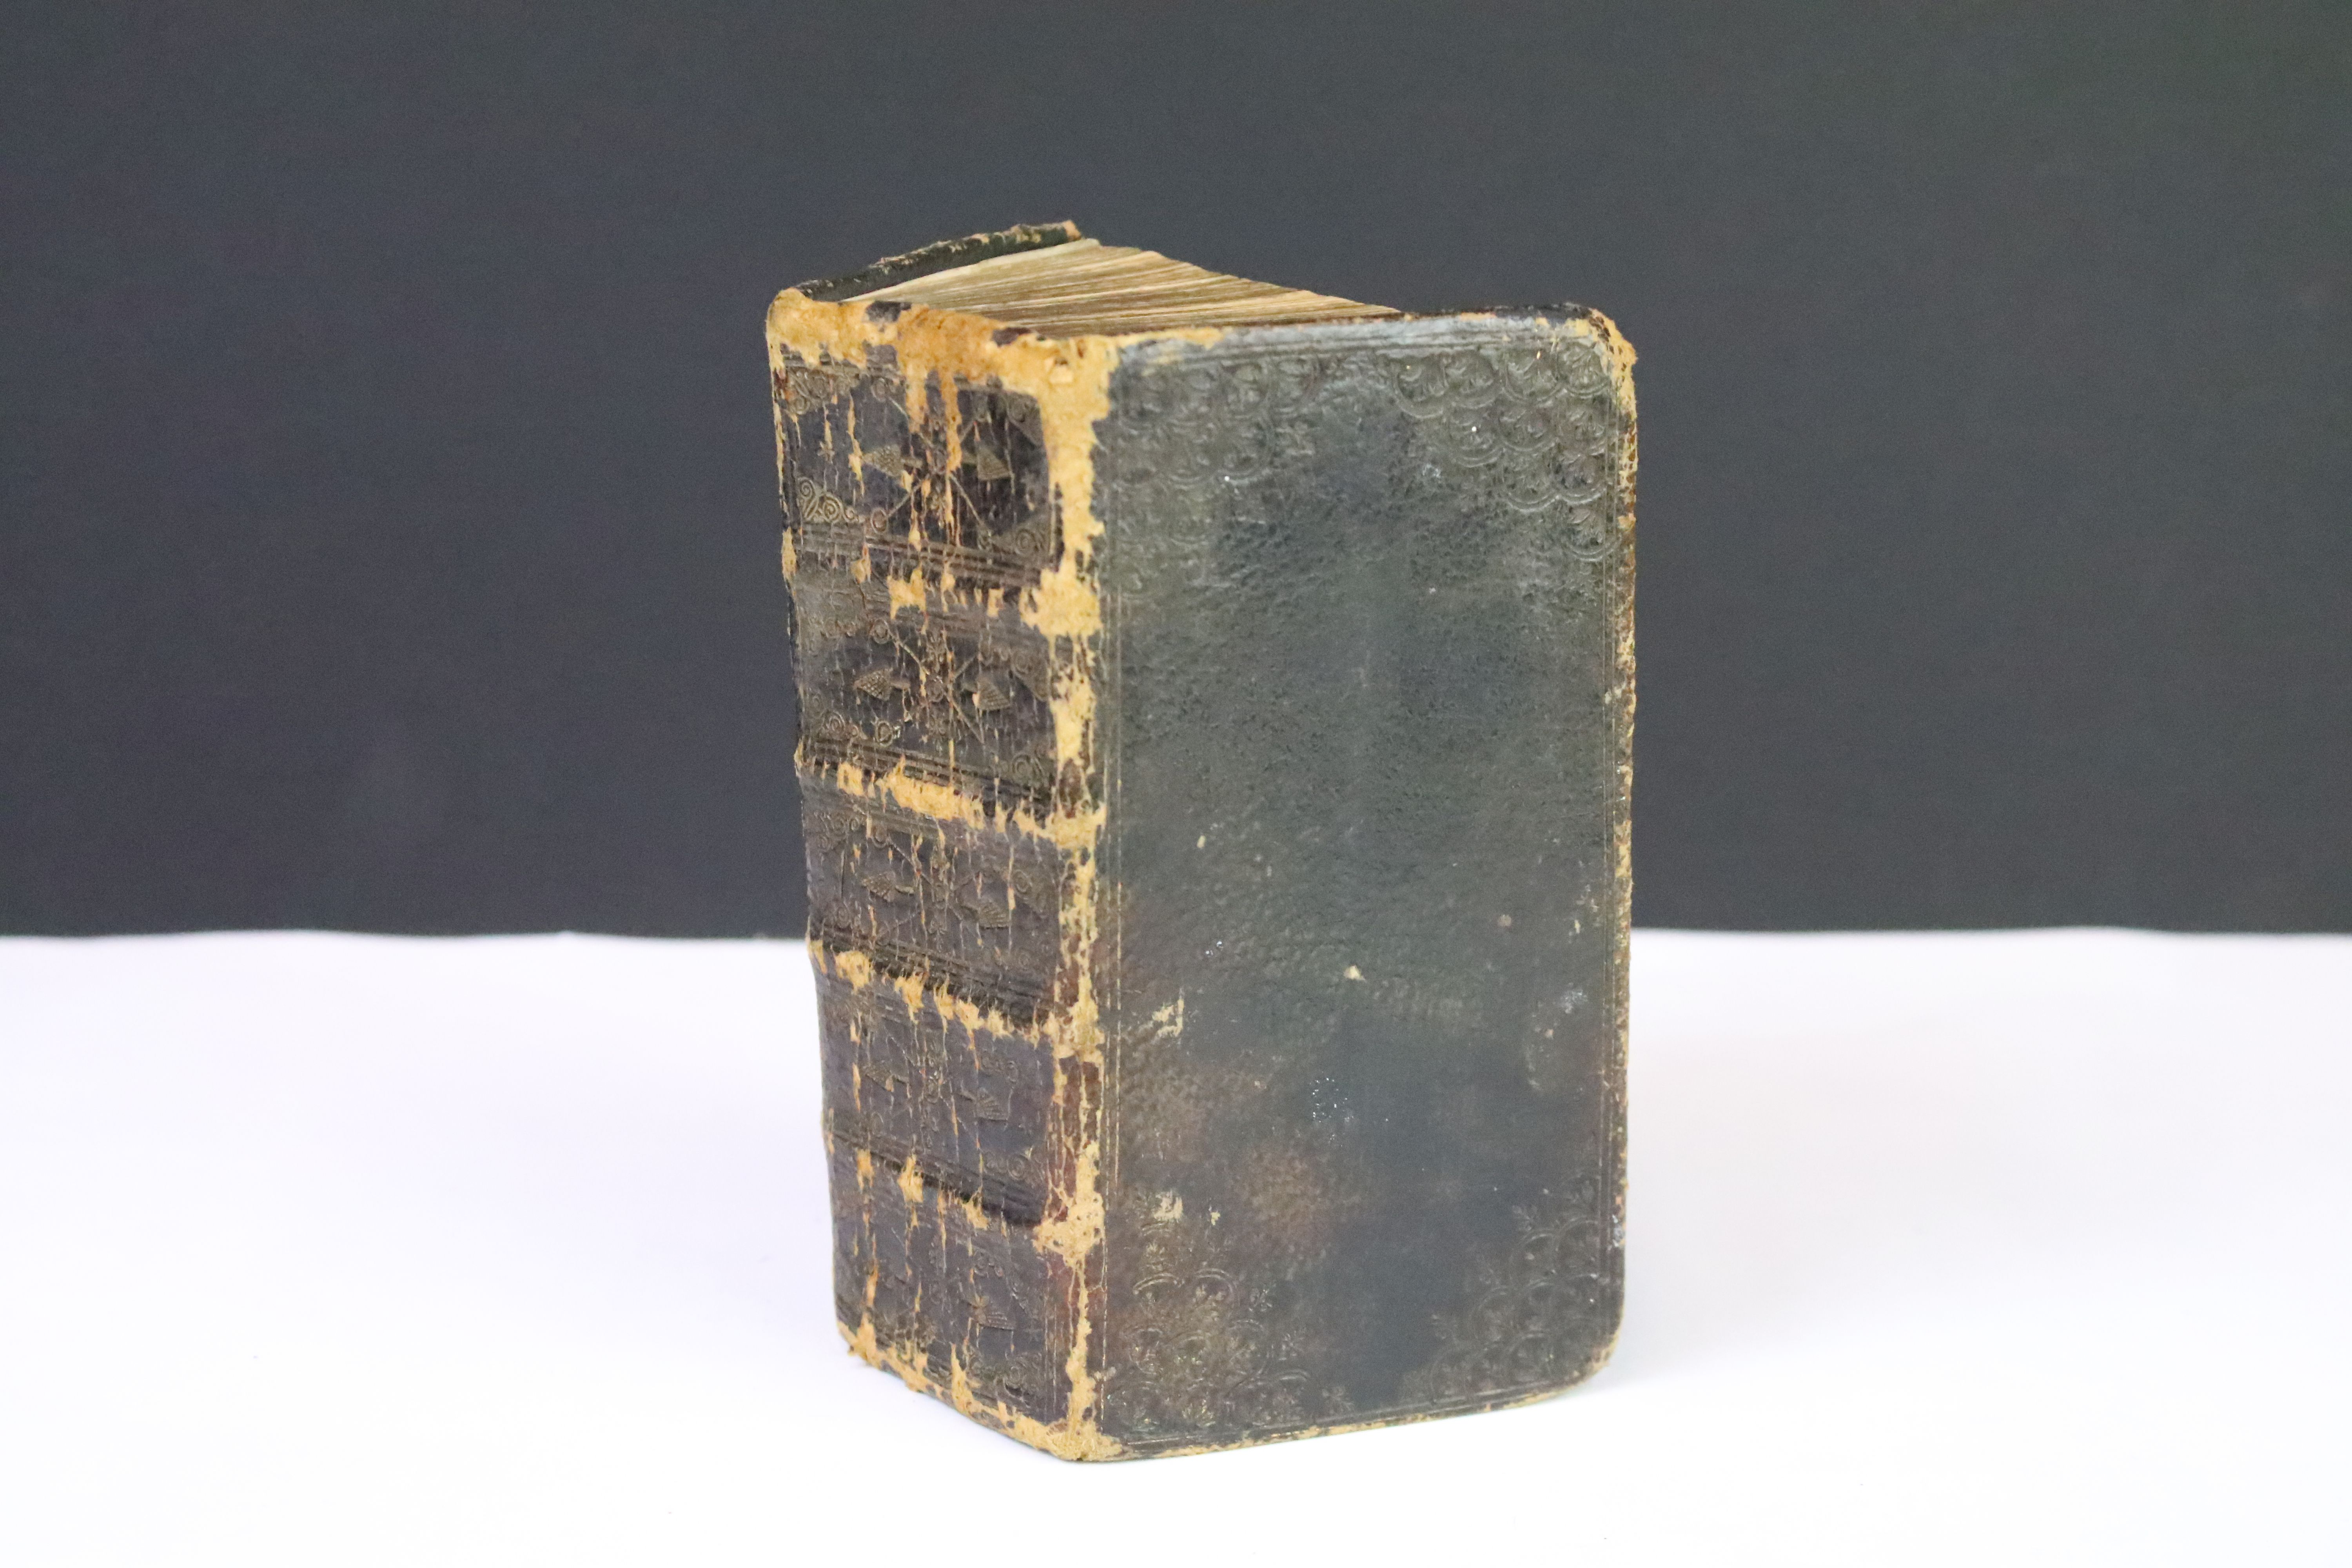 An antique 17th century bible dated 1653